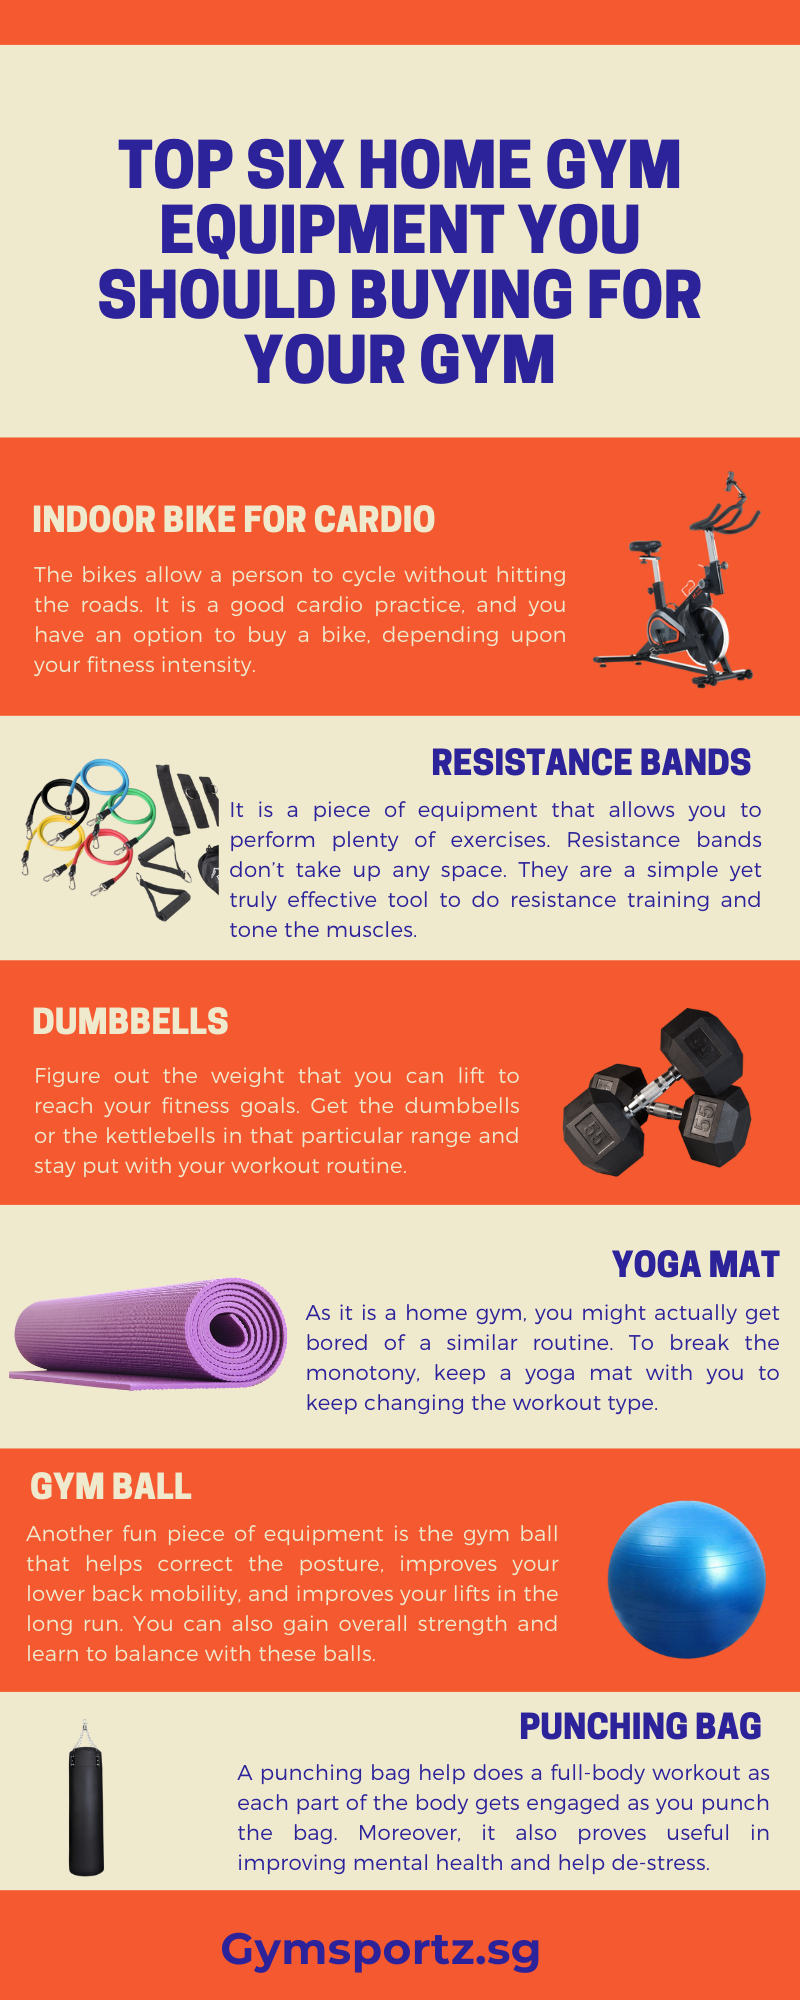 Top Six Home Gym Equipment You Should Buying for Your Gym.png  by Gymsportz